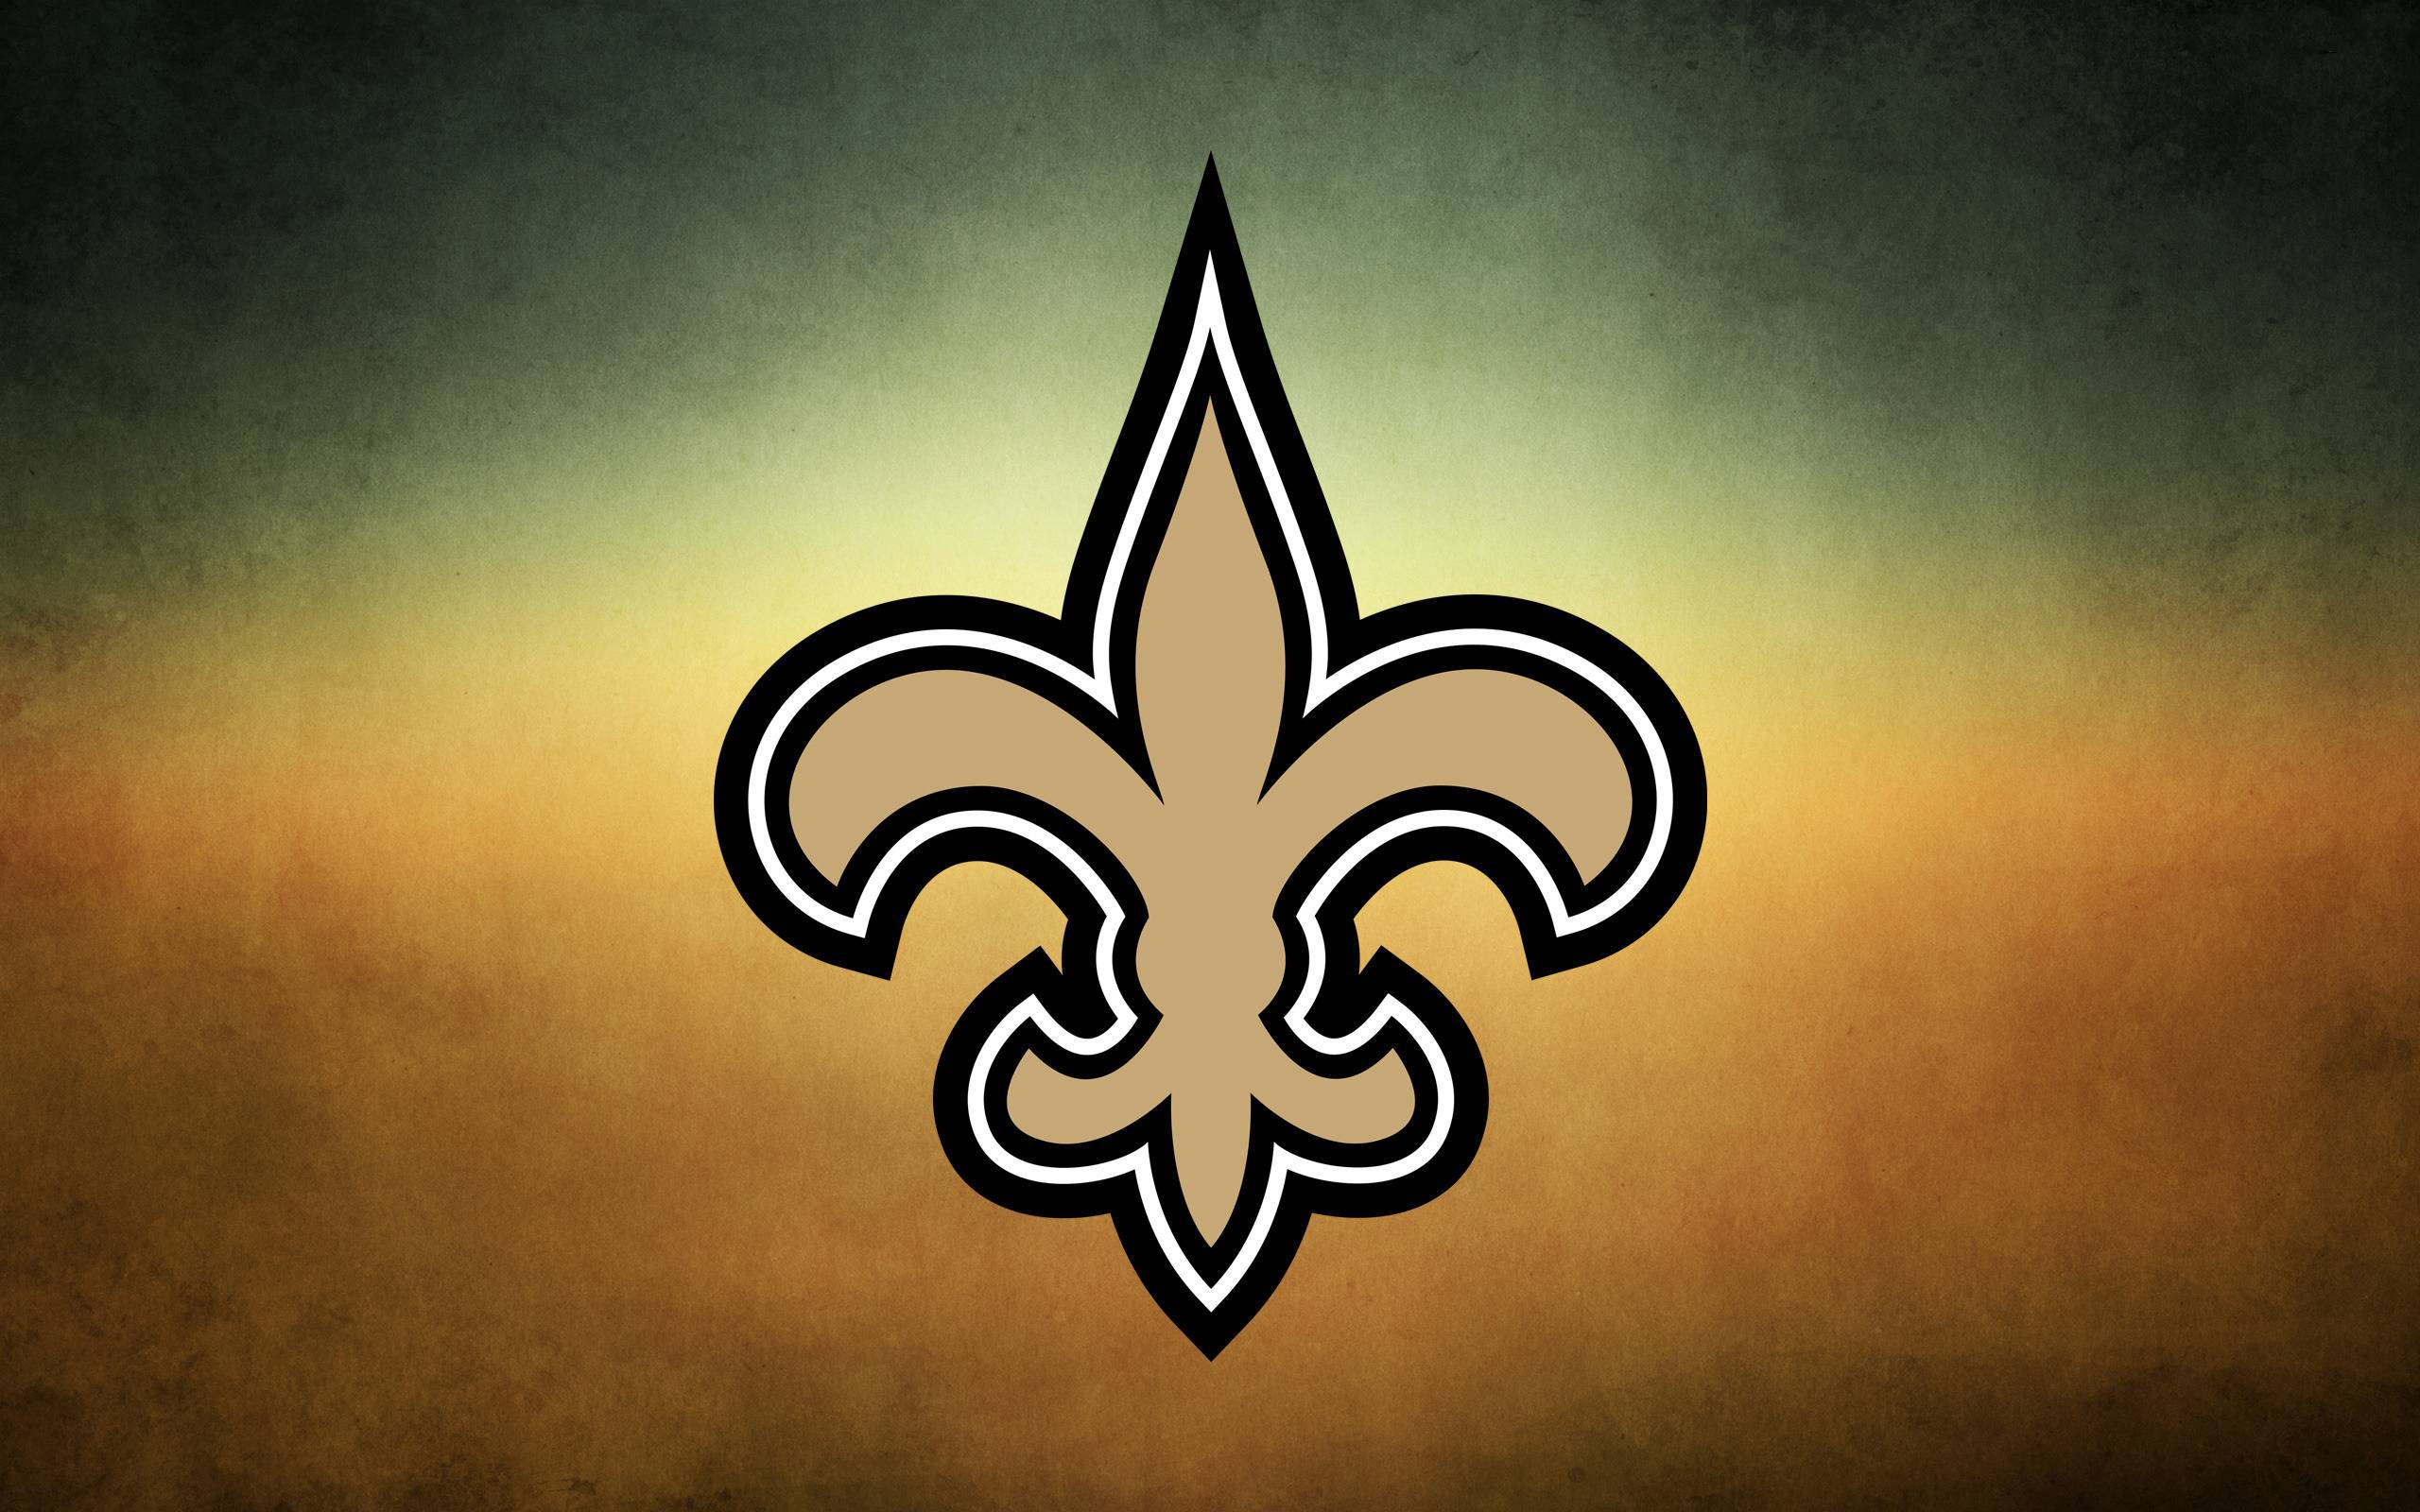 New Orleans Saints 2014 NFL Logo Wallpapers Wide or HD